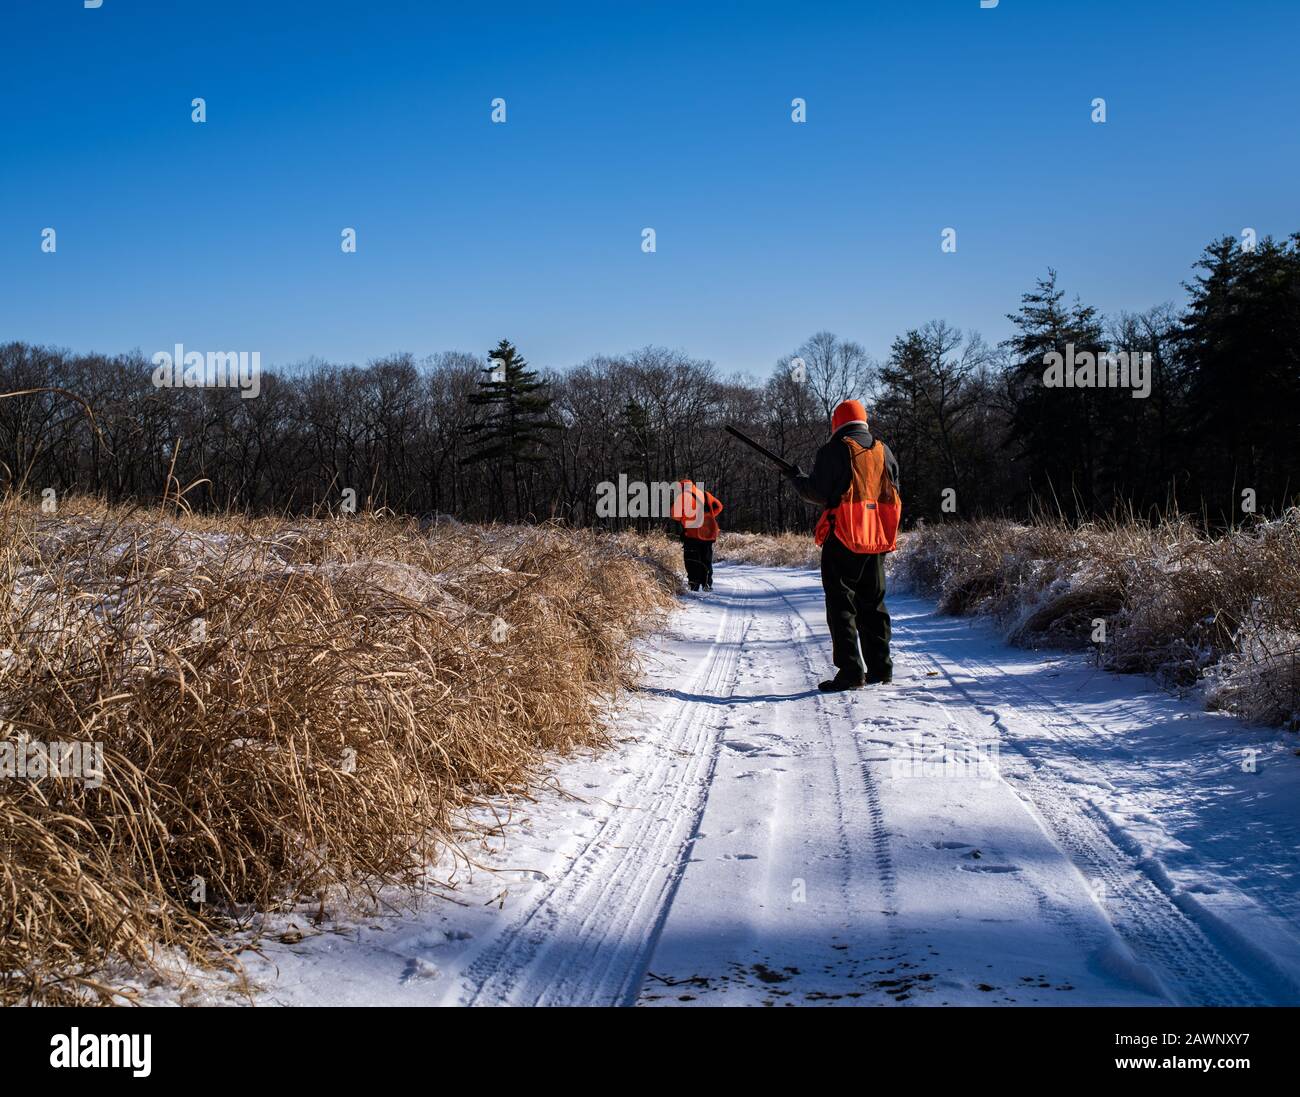 Mapleville Rhode Island, December 20th, 2019: A Bird Hunter Watches His Partner In the Winter Stock Photo